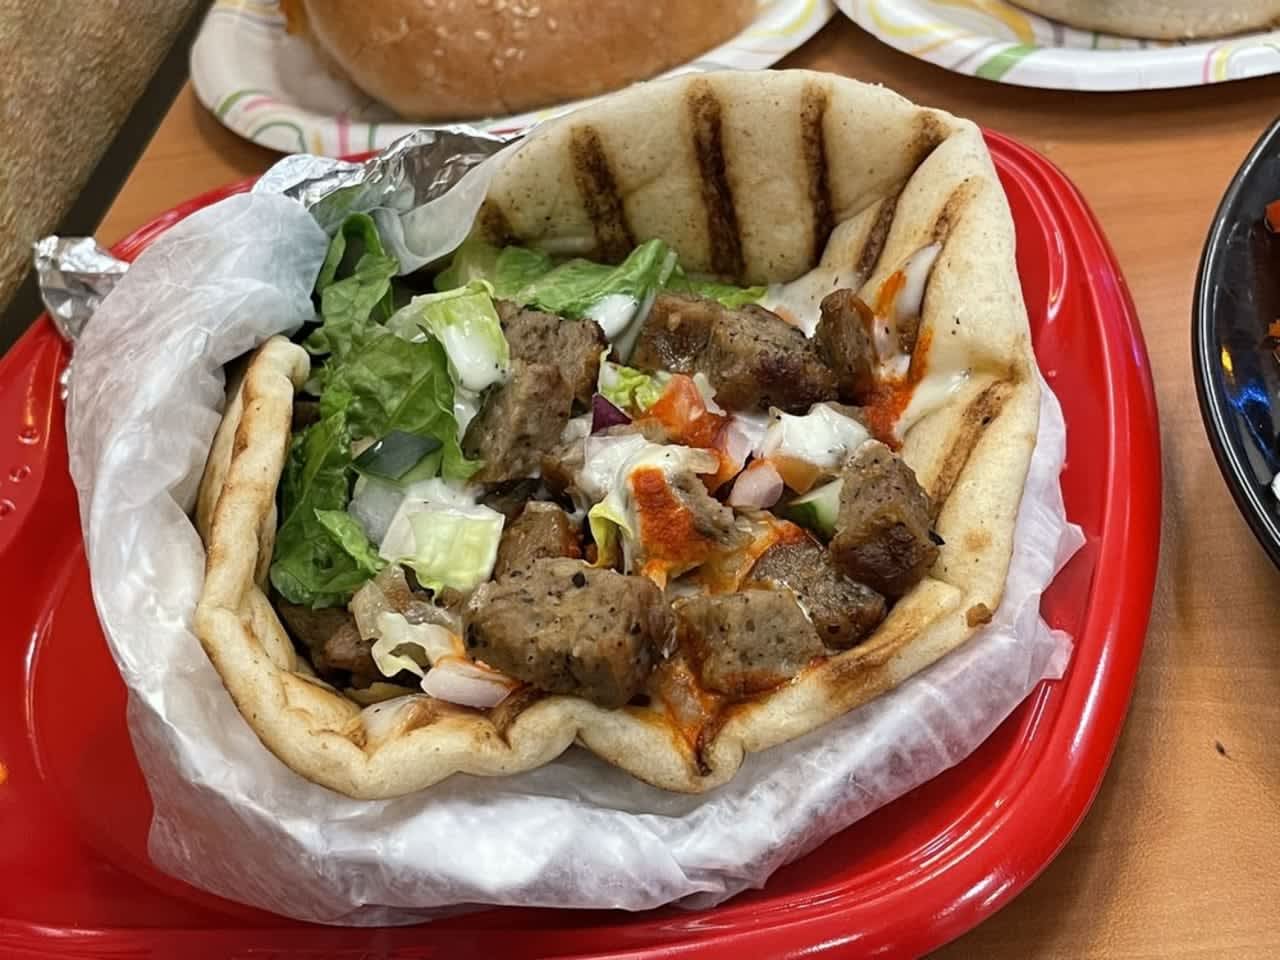 Ready for a gyro? Head to a new restaurant on Long Island.